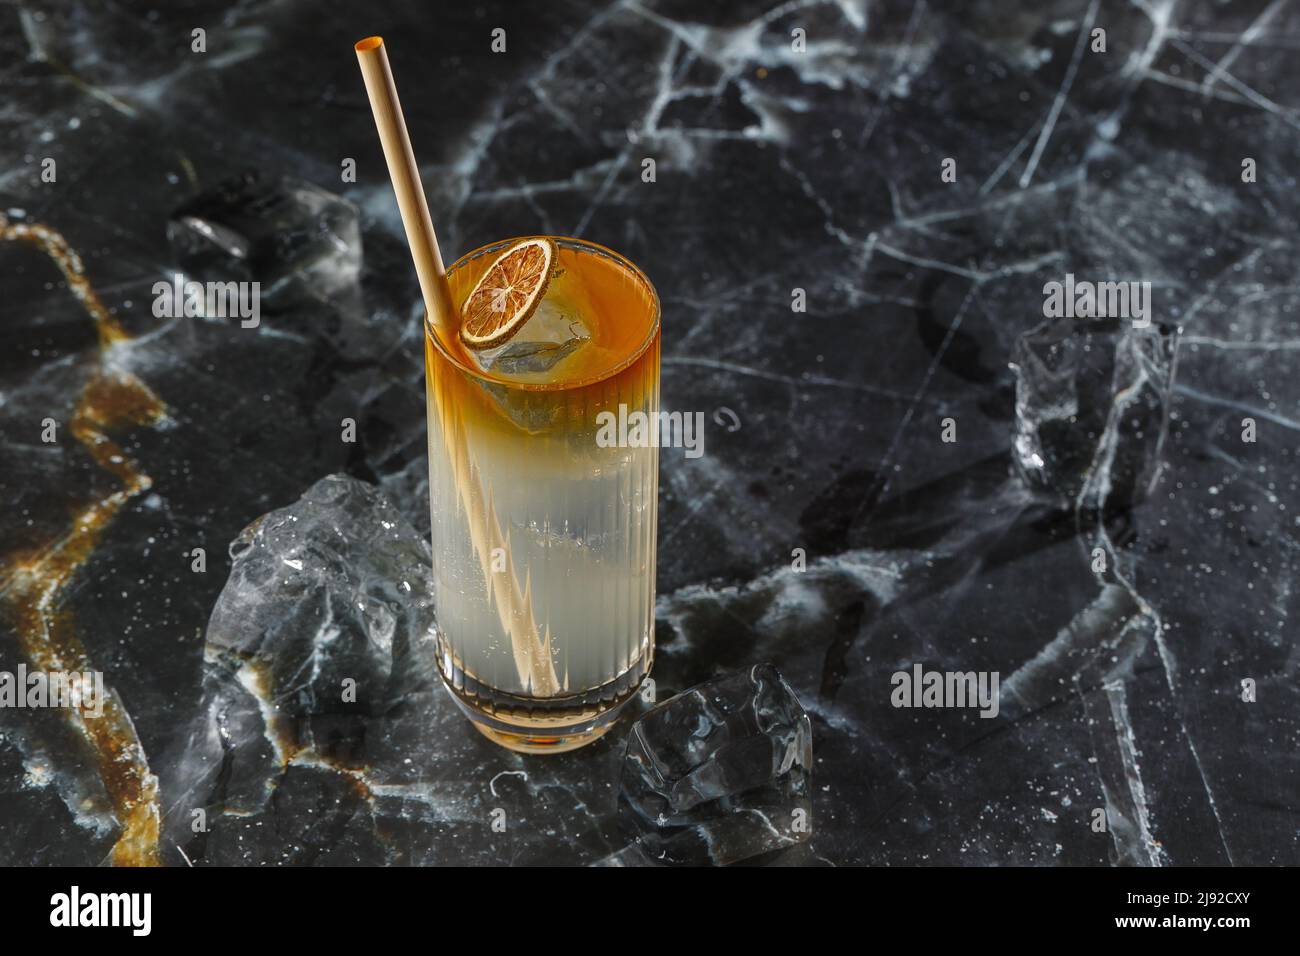 Dark n Stormy cocktail standing on the black marble background. Refreshing Boozy Rum Dark and Stormy Cocktail with Ginger Beer Stock Photo